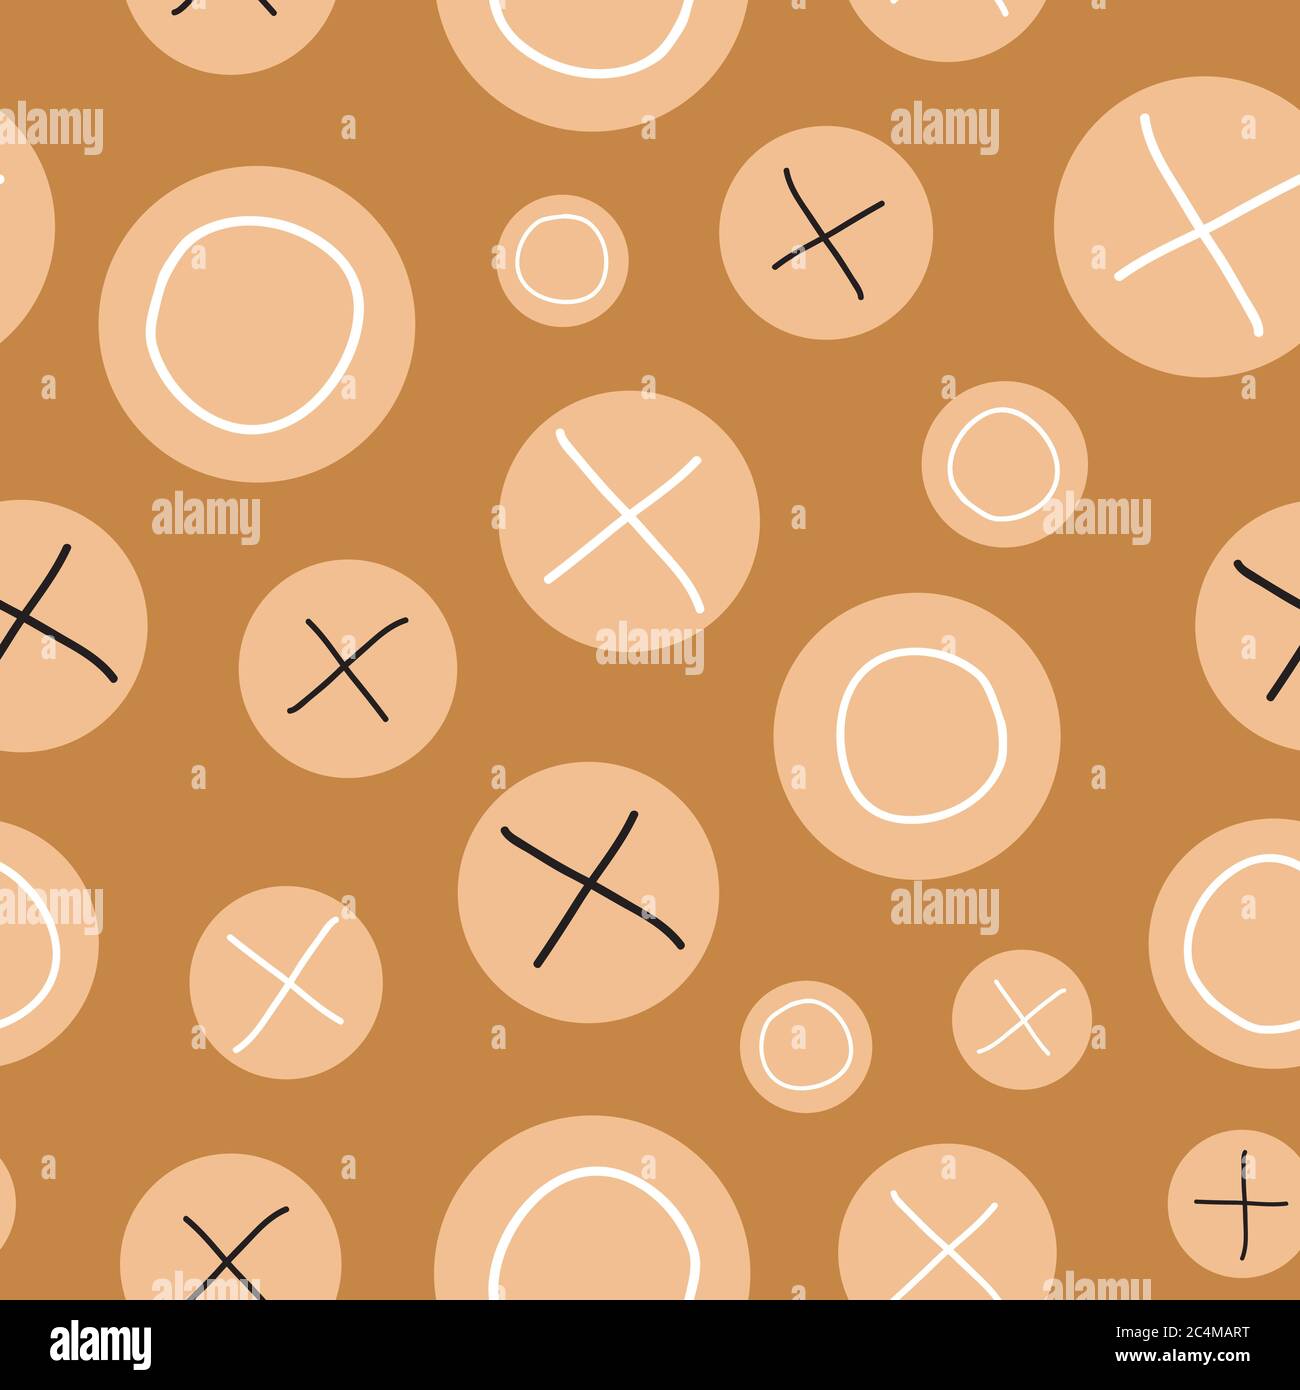 circle your symbol black and white x and o highlighted in tan circles on brown background vector seamless repeat pattern surface design Stock Vector